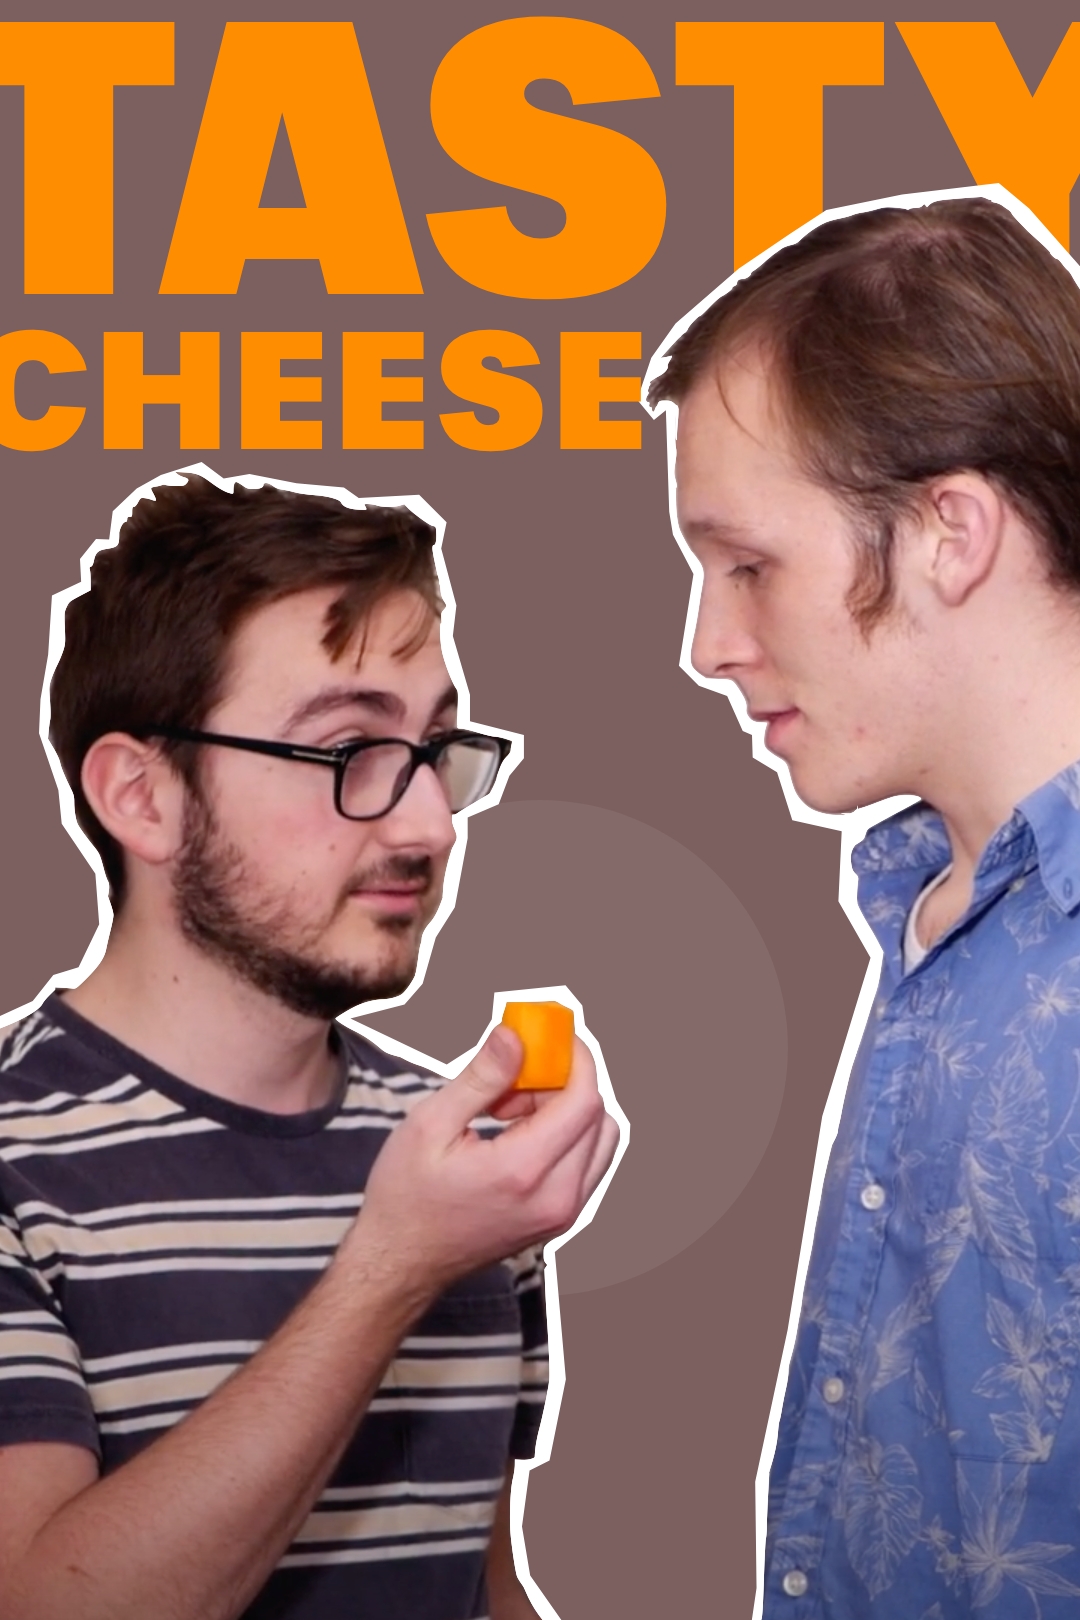 Poster for the film "Tasty Cheese"